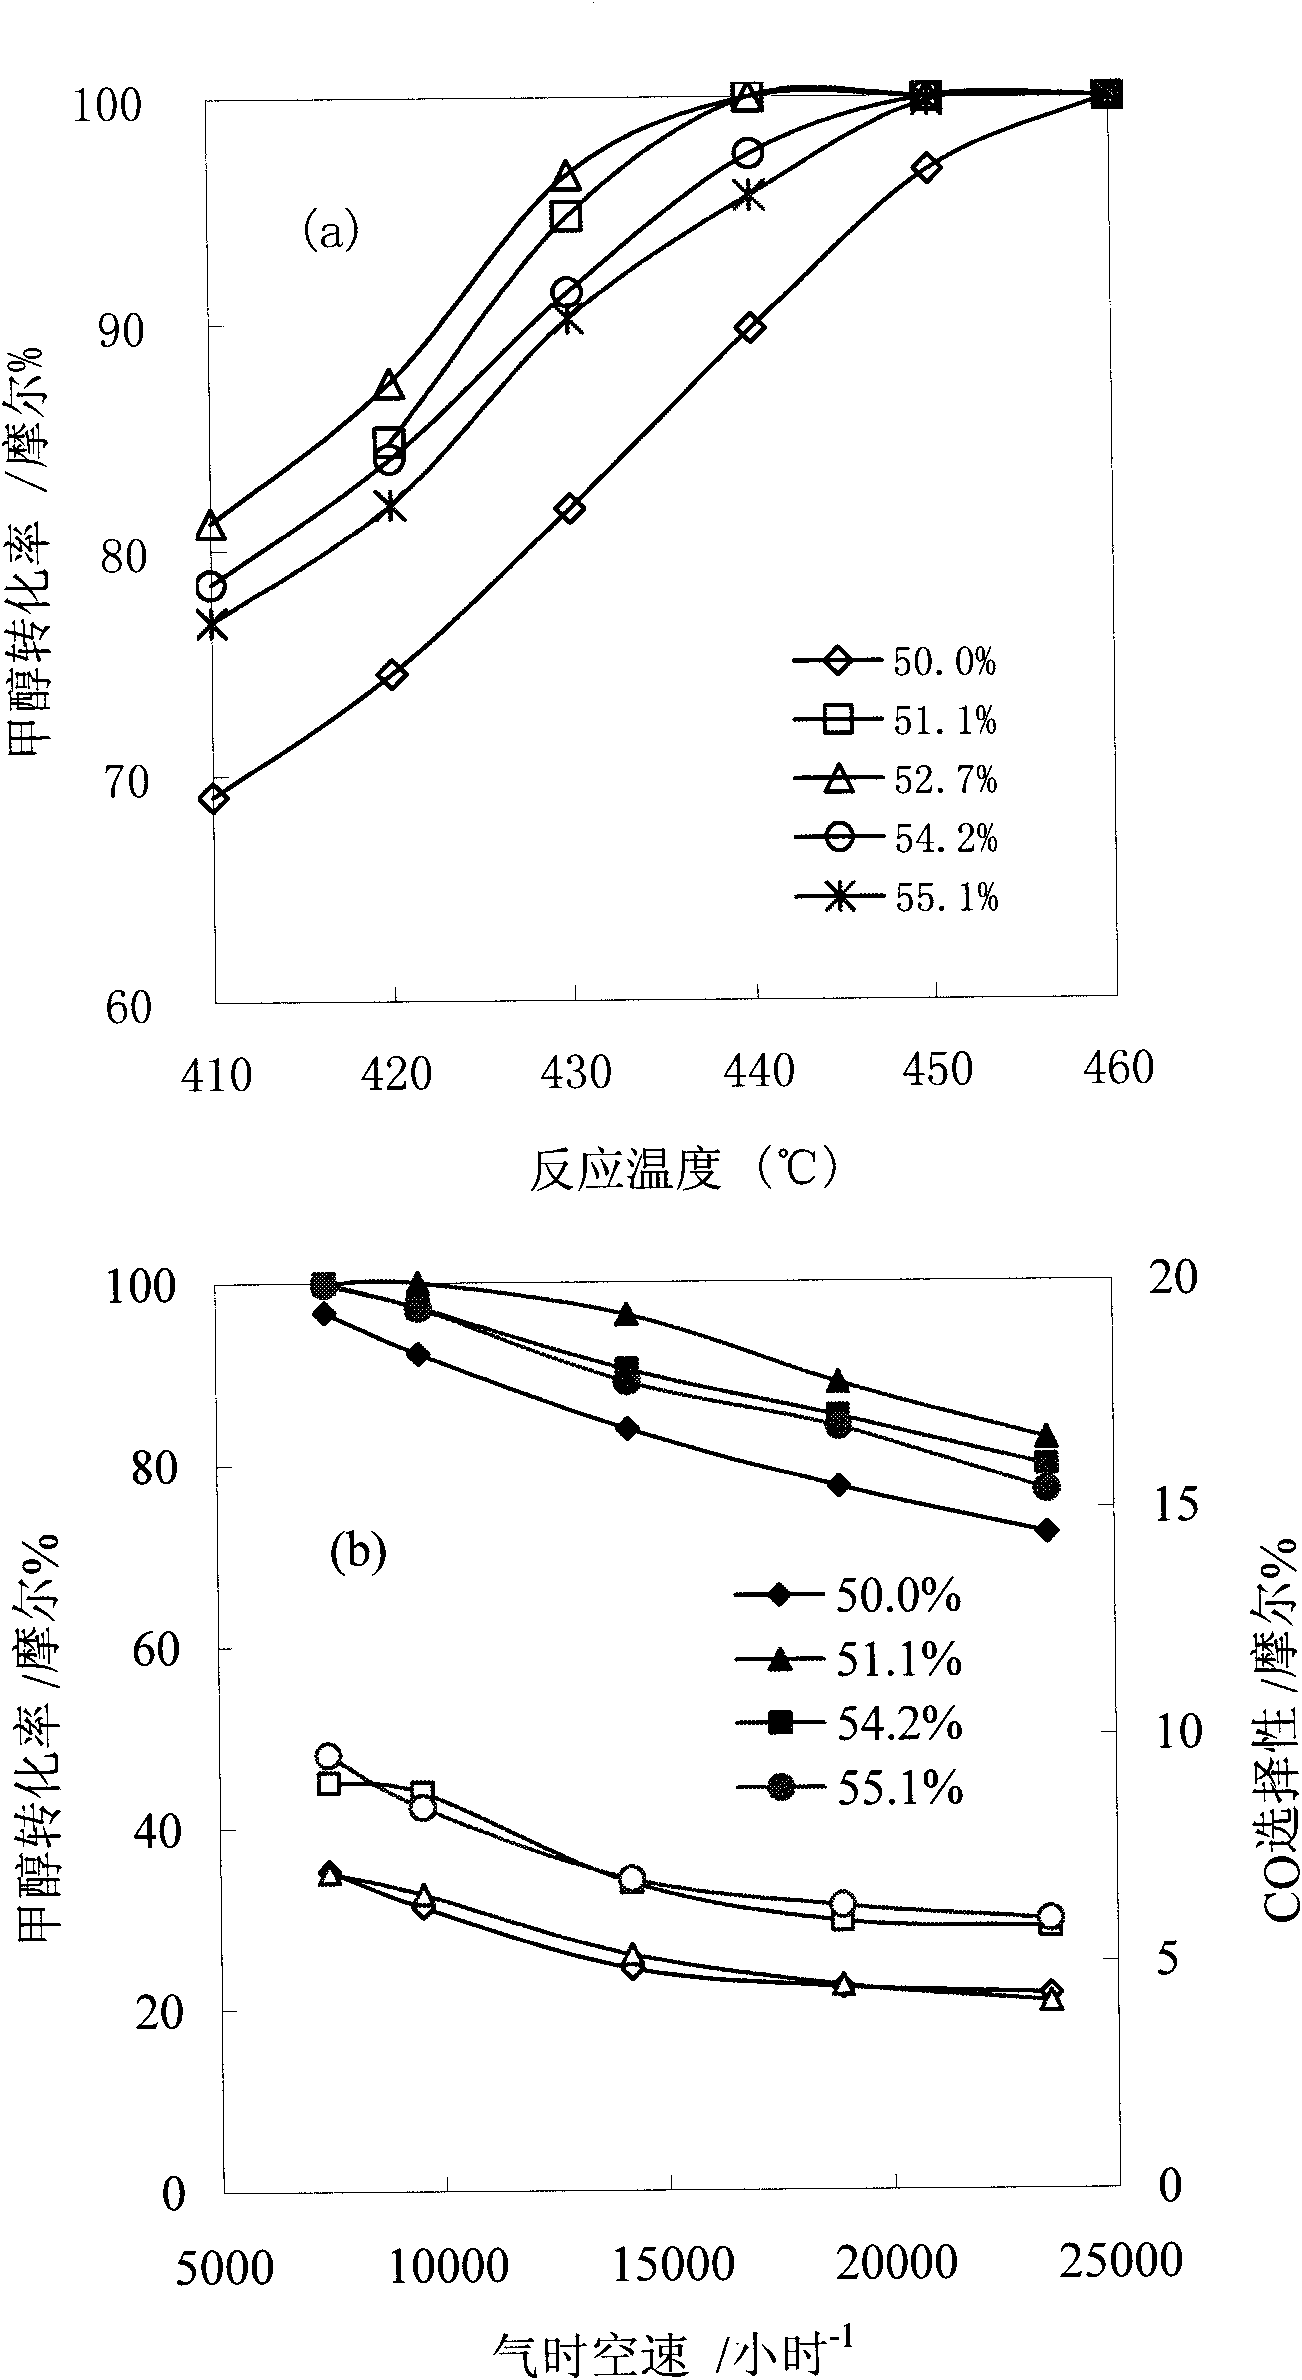 Method for producing hydrogen by reforming methanol steam